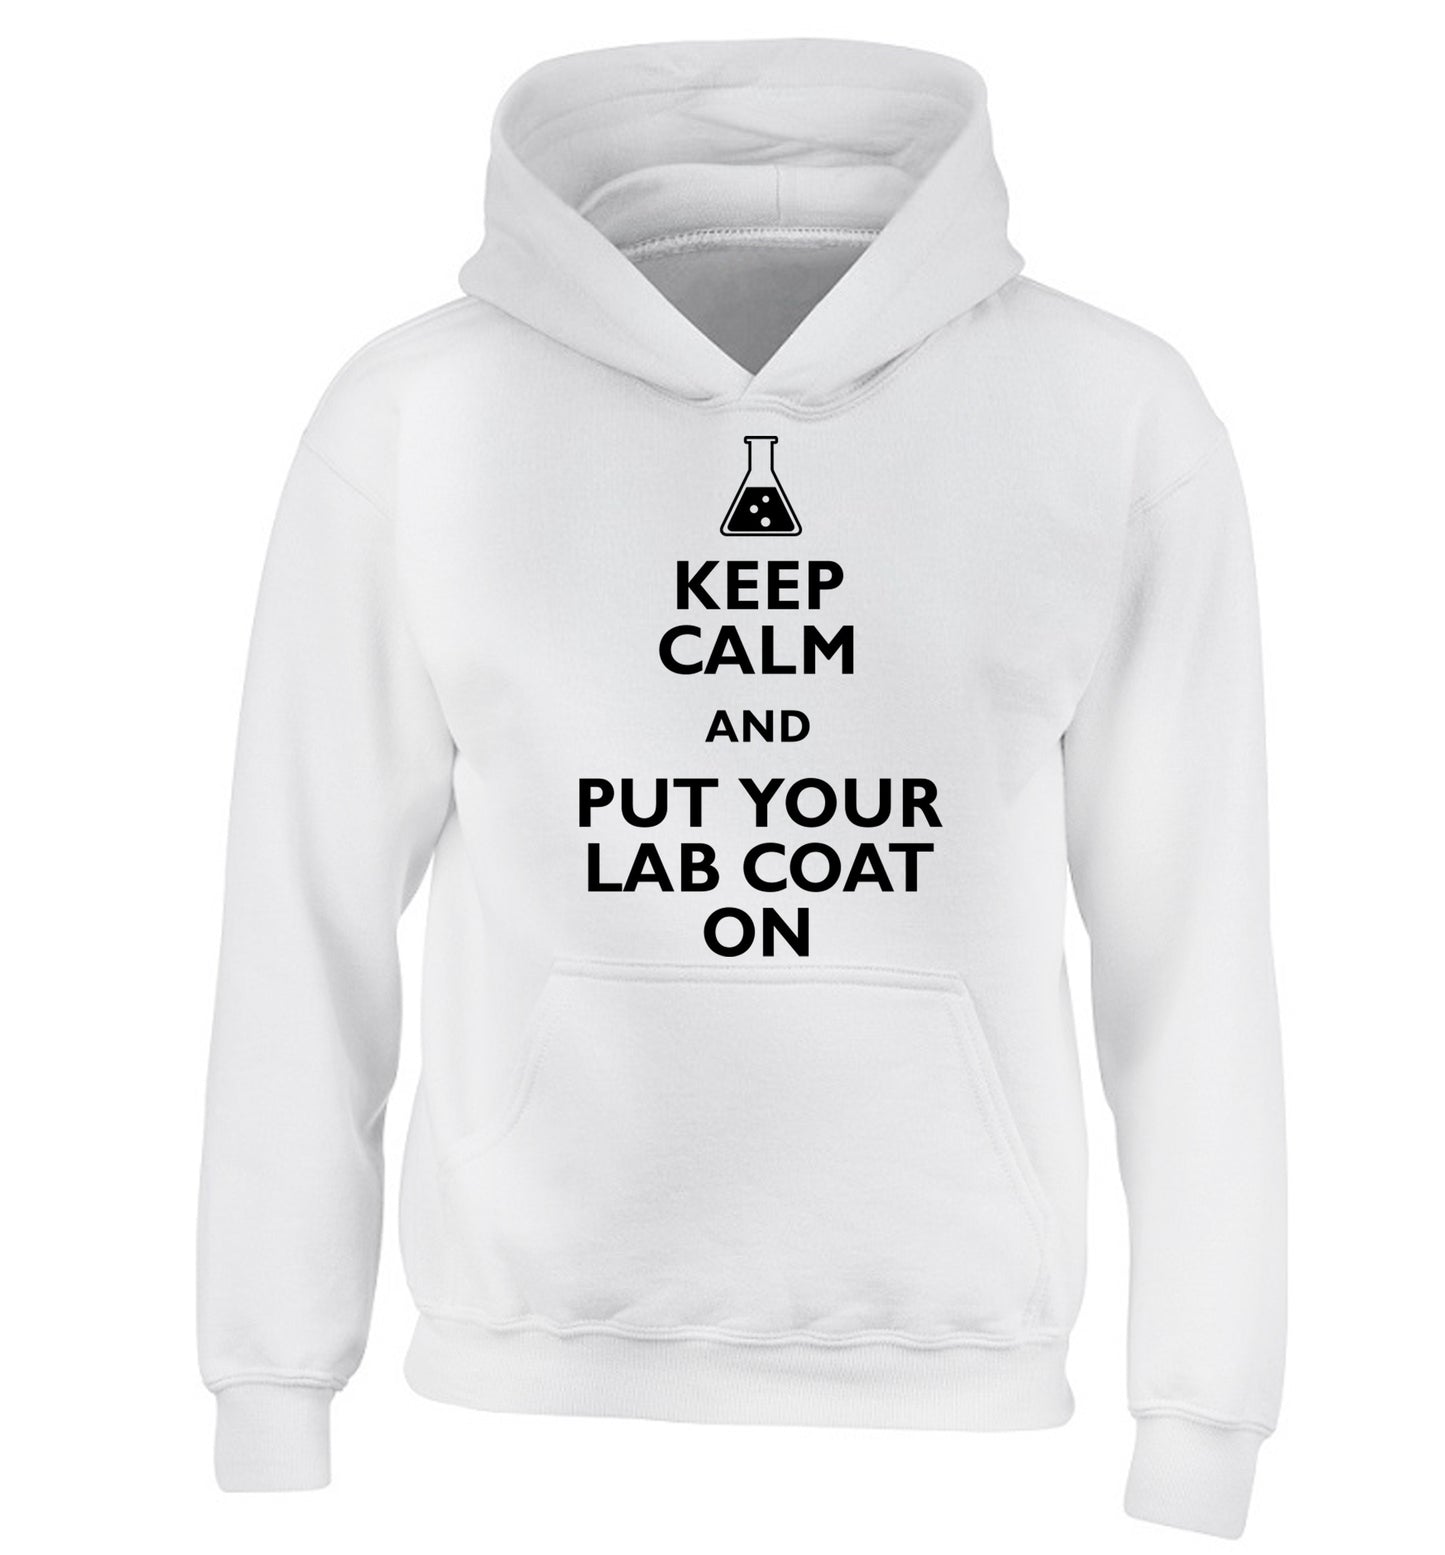 Keep calm and put your lab coat on children's white hoodie 12-14 Years